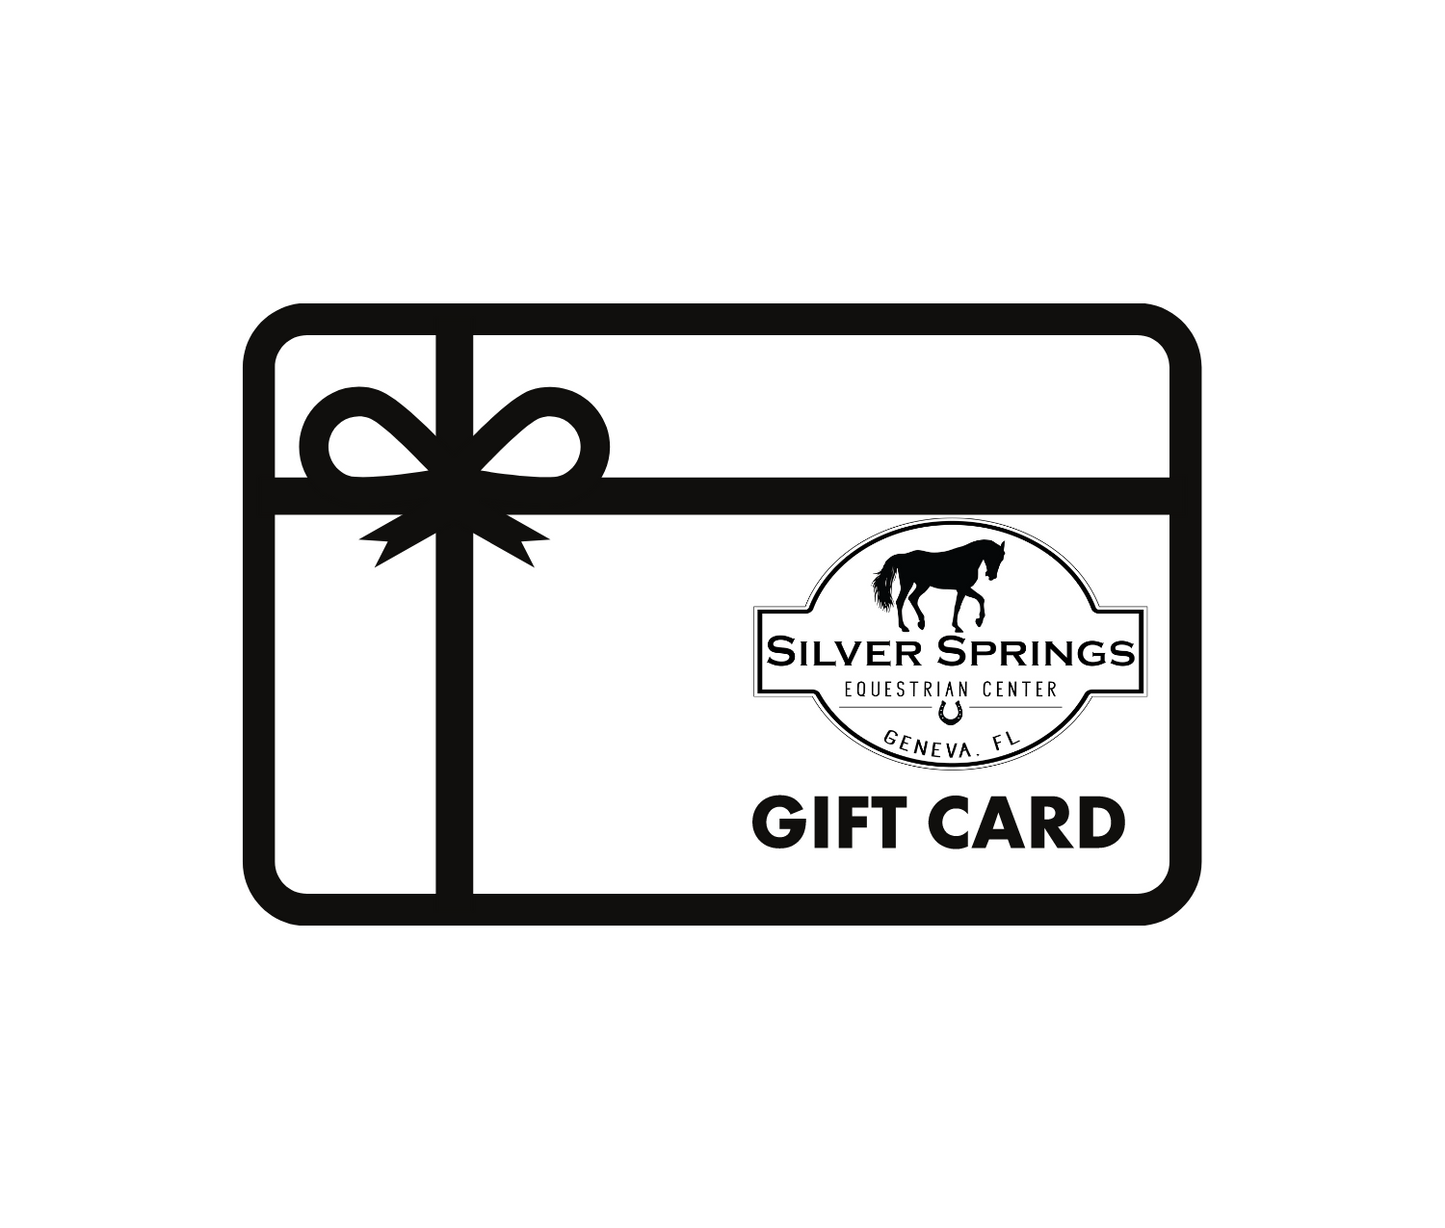 Silver Springs Equestrian Center Gift Card